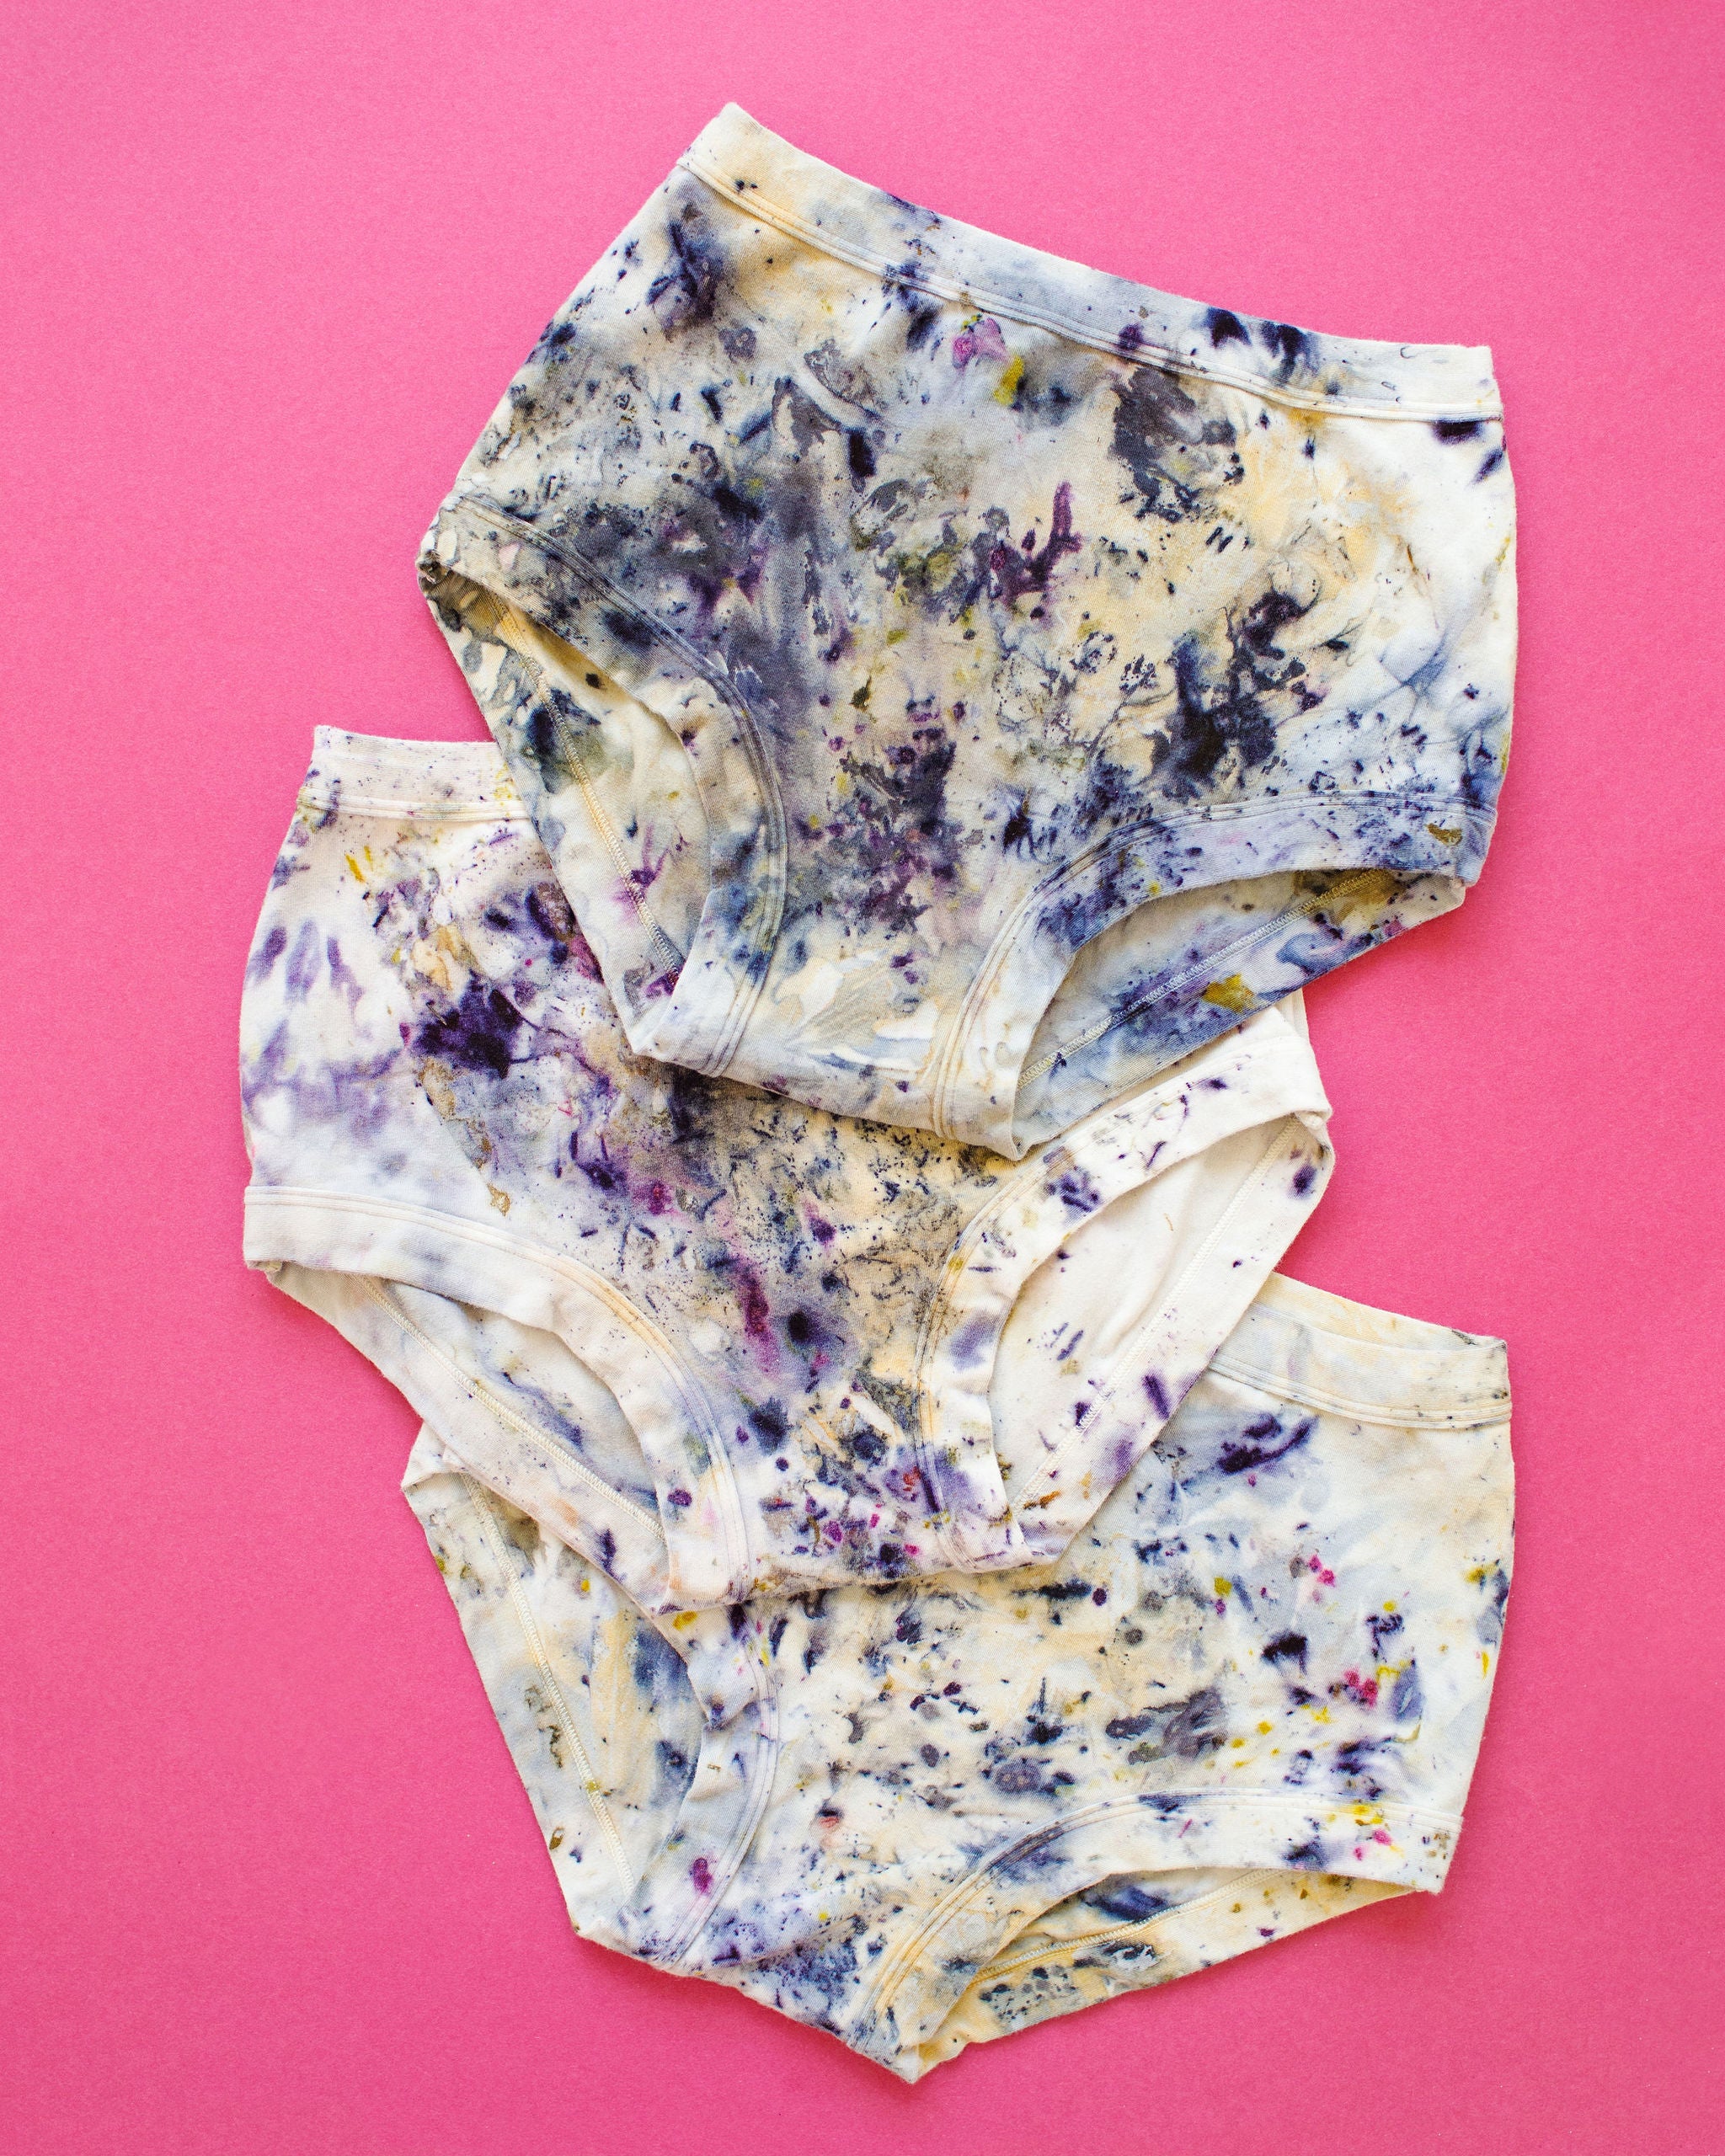 Flat lay of three Thunderpants Original style underwear in Cosmic Compost hand dye.